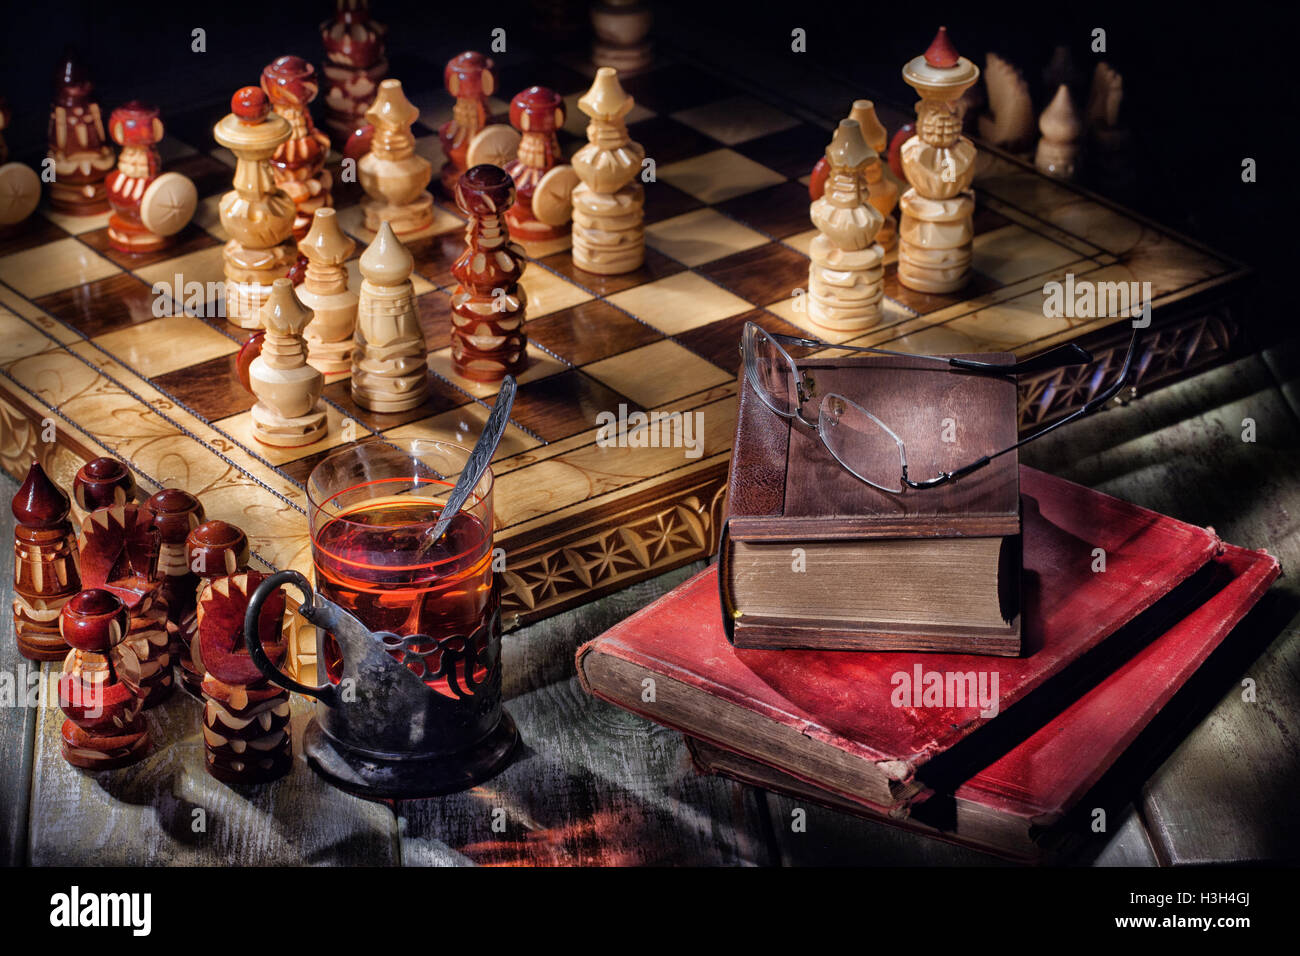 Wooden crafted chess, old books and glass of tea Stock Photo